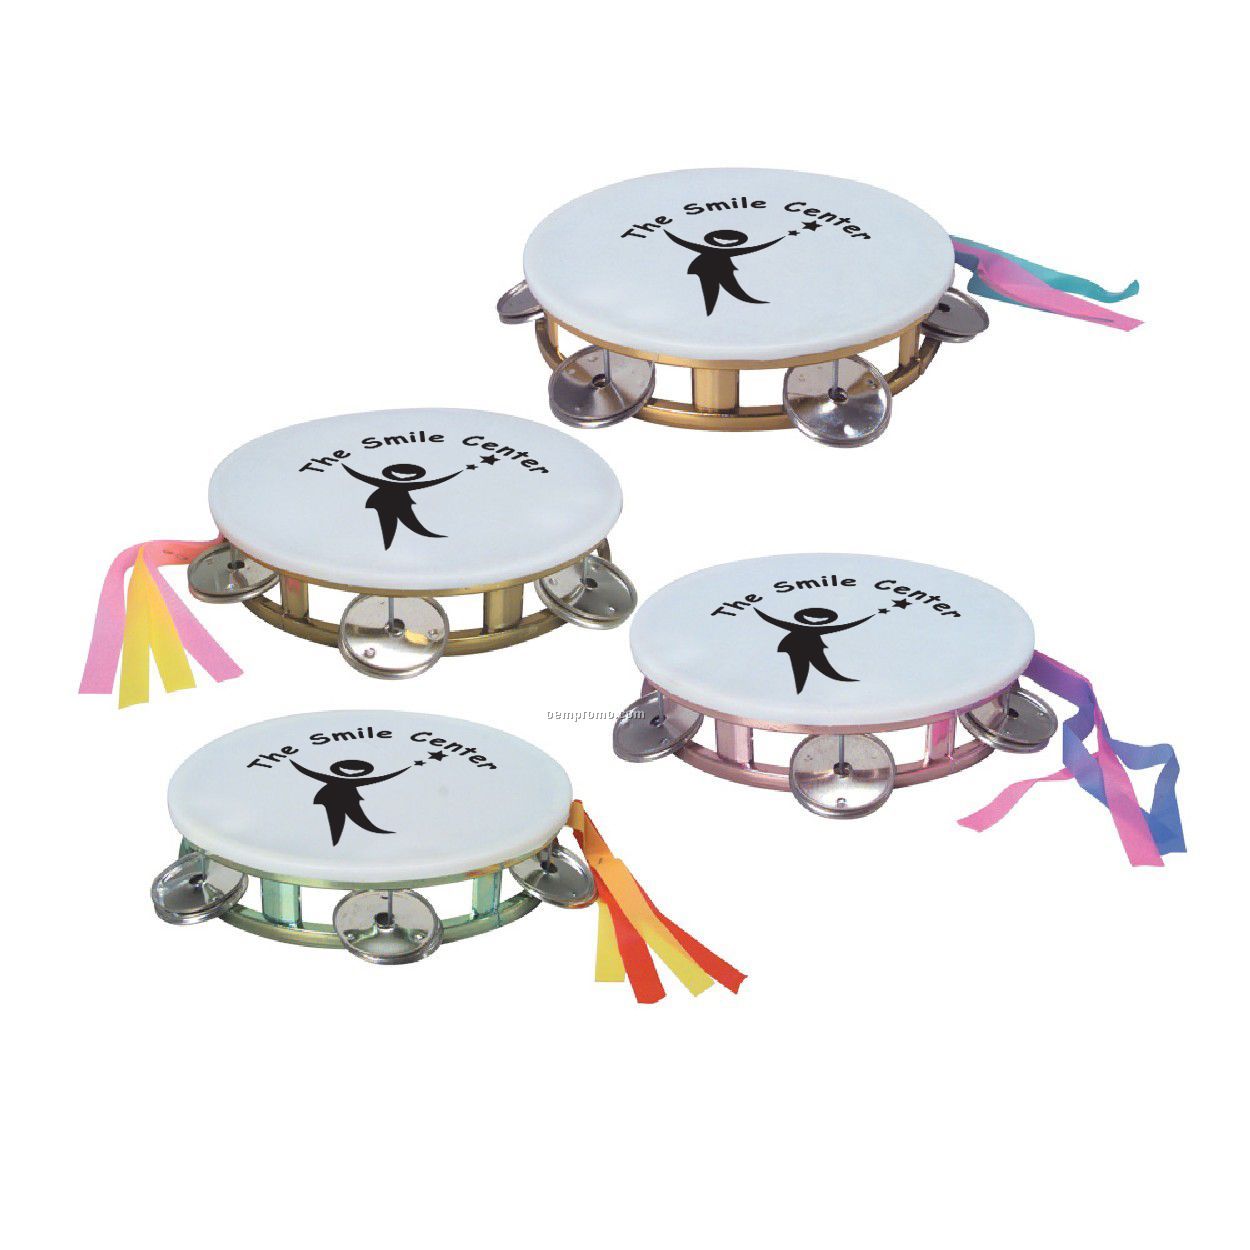 5 1/2" Tambourine With Metallic Colored Sides And White Top.